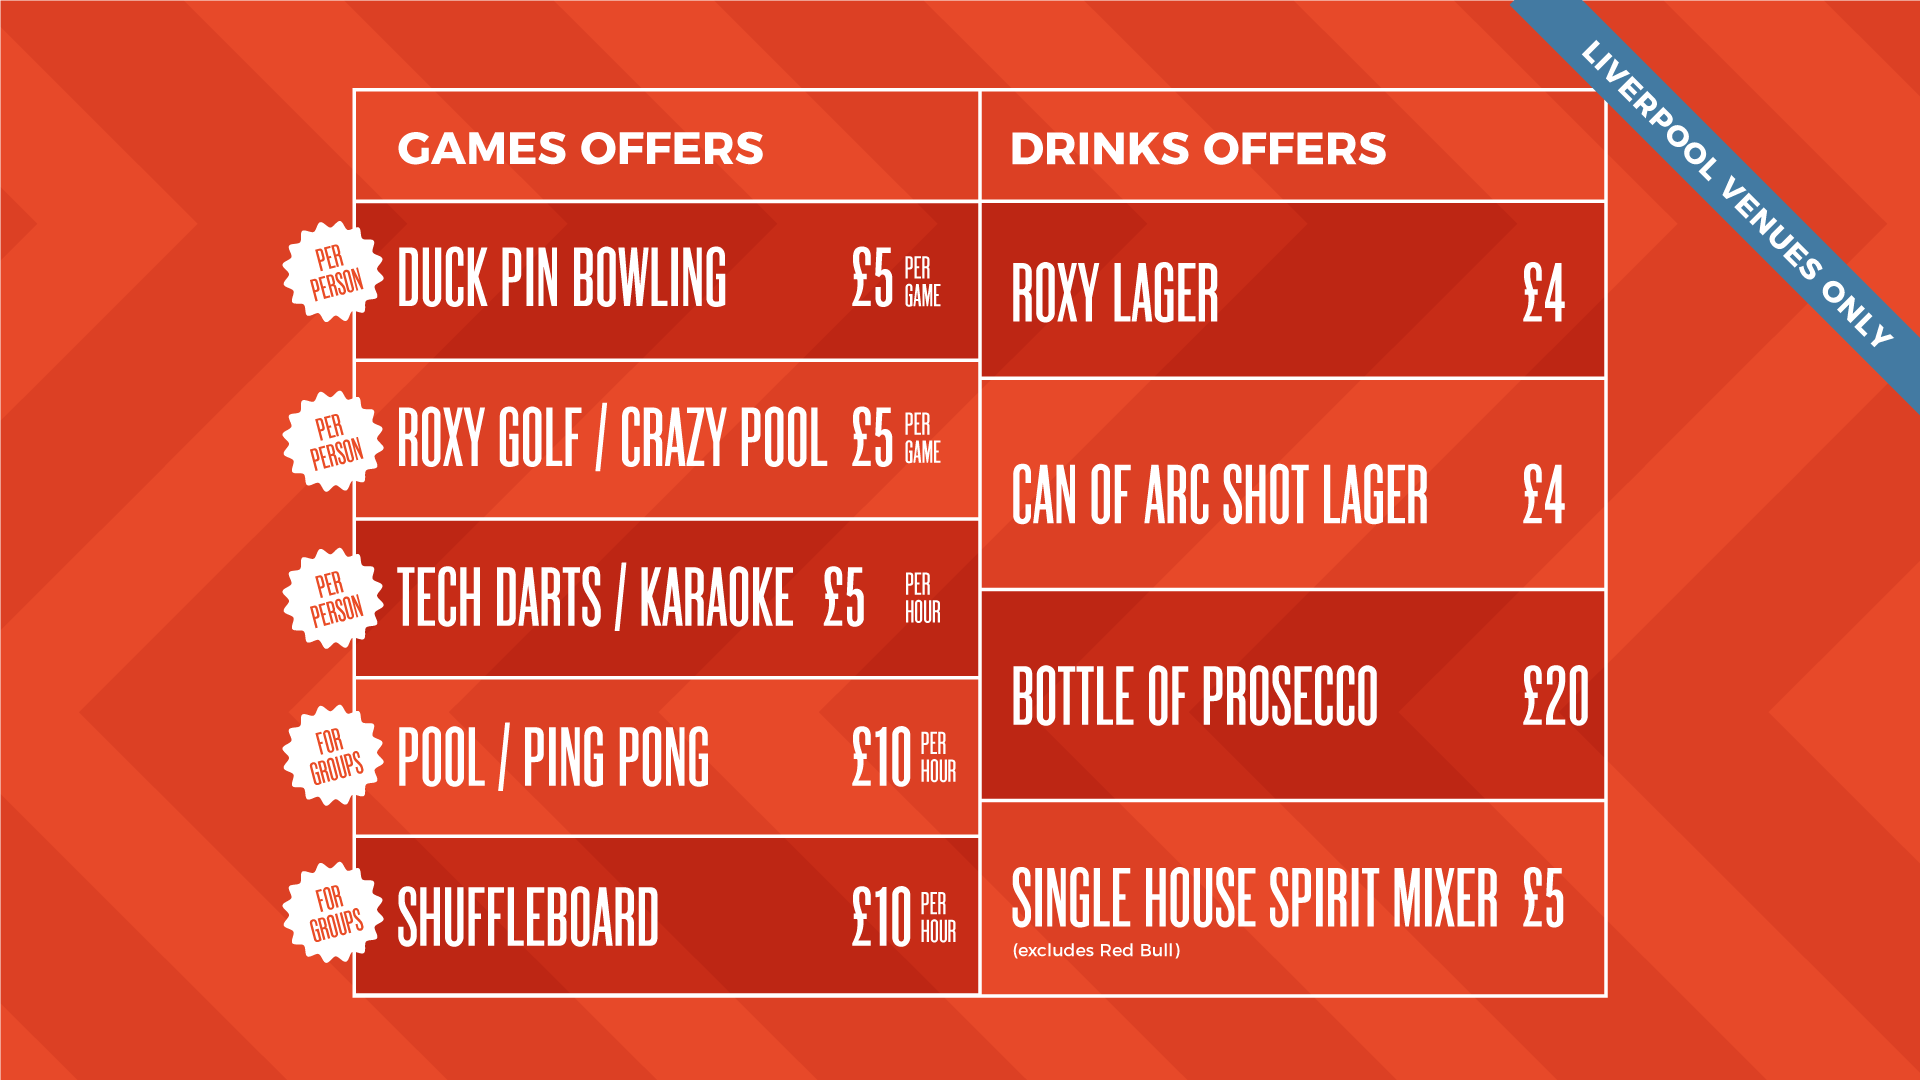 Student Offers: Duck pin bowling: £5 per person, per game Roxy Golf / Crazy Pool : £5 per person, per game Tech Darts / Karaoke: £5 per person, per game Shuffleboard: £10 per hour (for groups) Pool / Ping Pong: £10 per hour (for groups) Roxy Lager: £4 Can of Arc Shot Lager: £4 Bottle Of Prosecco: £20 Single House Spirit Mixer (excludes Red Bull): £5